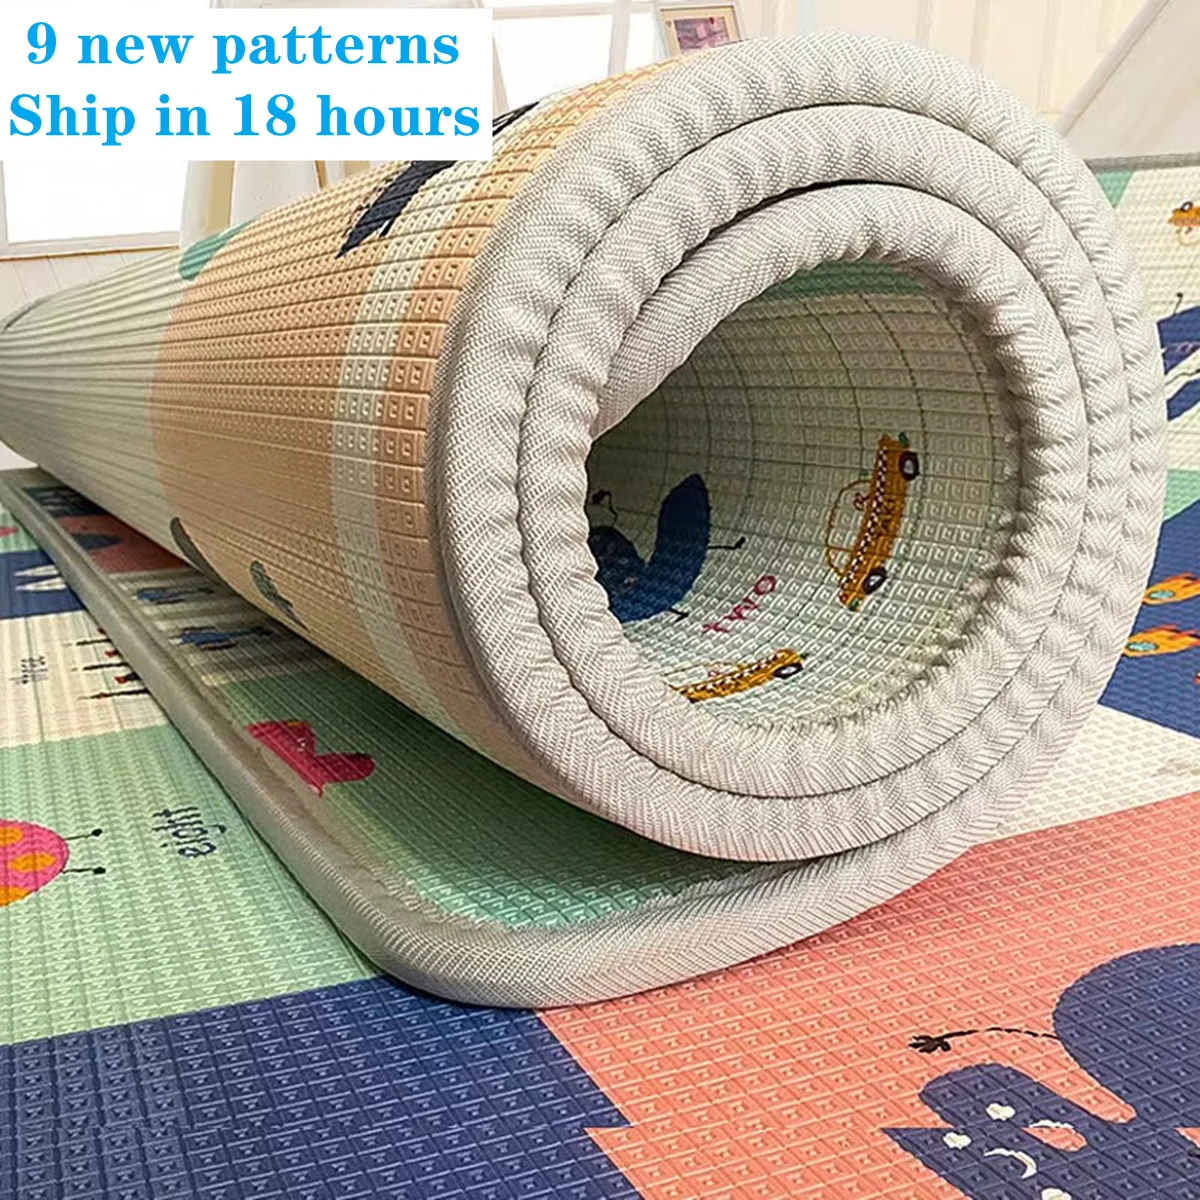 200cmX180cm Children's Safety Mat Rugs Large Size Non-toxic High-quality Baby Activity Gym Crawling Play Mats Carpet Baby Games